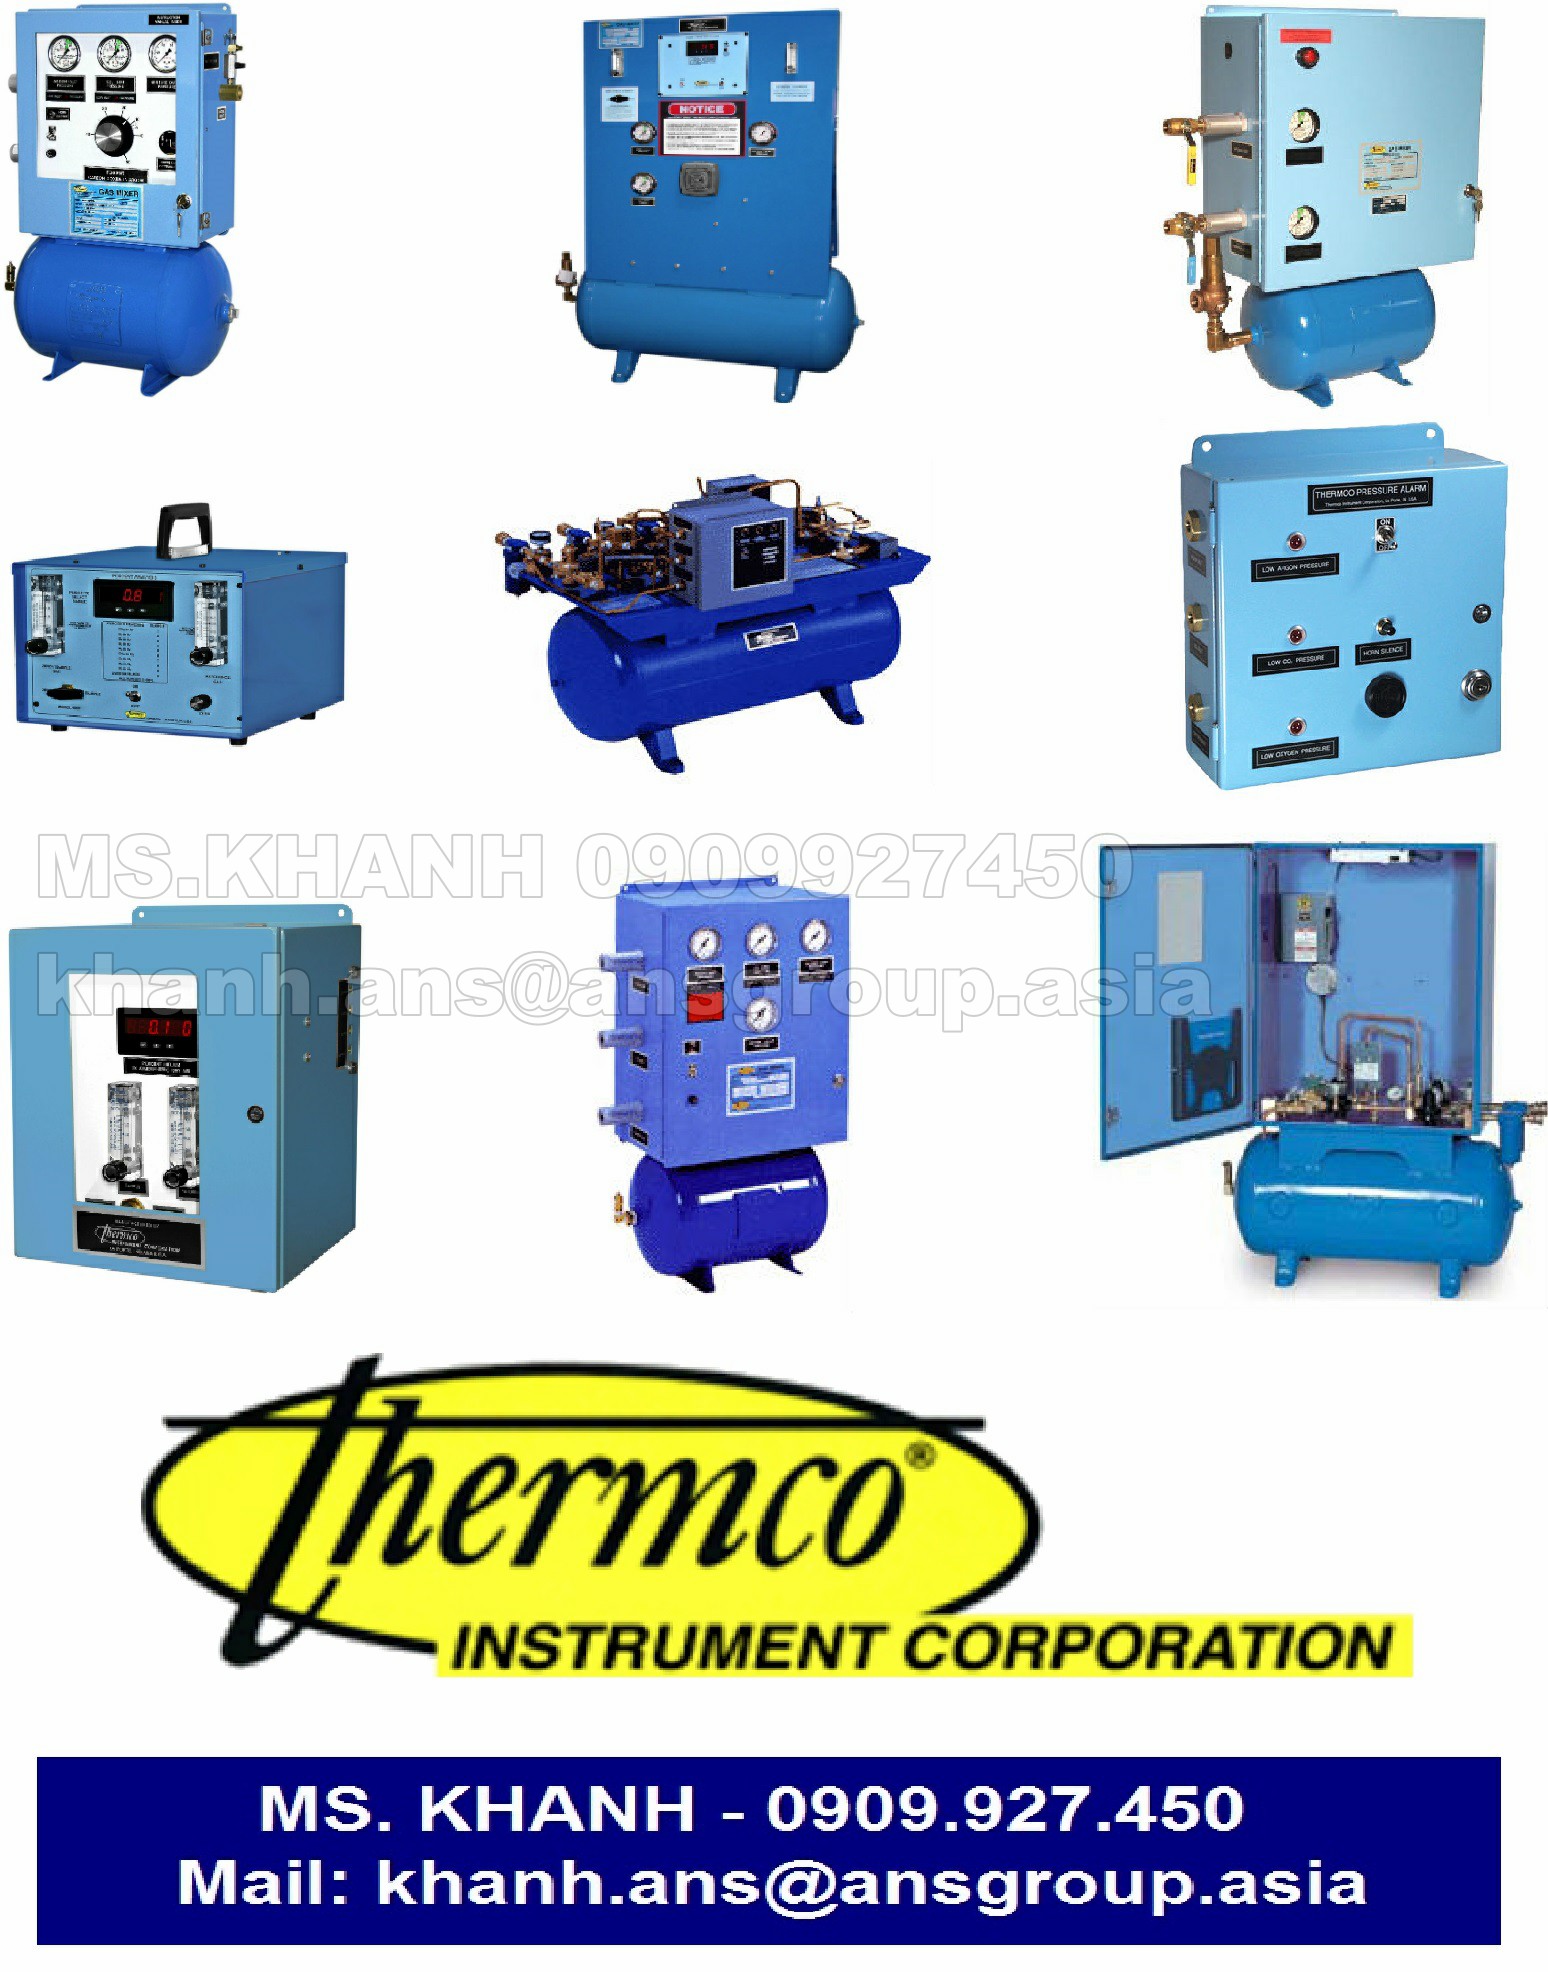 thiet-bi-8500ca50x1100-thermco-gas-mixer-thermco-vietnam.png